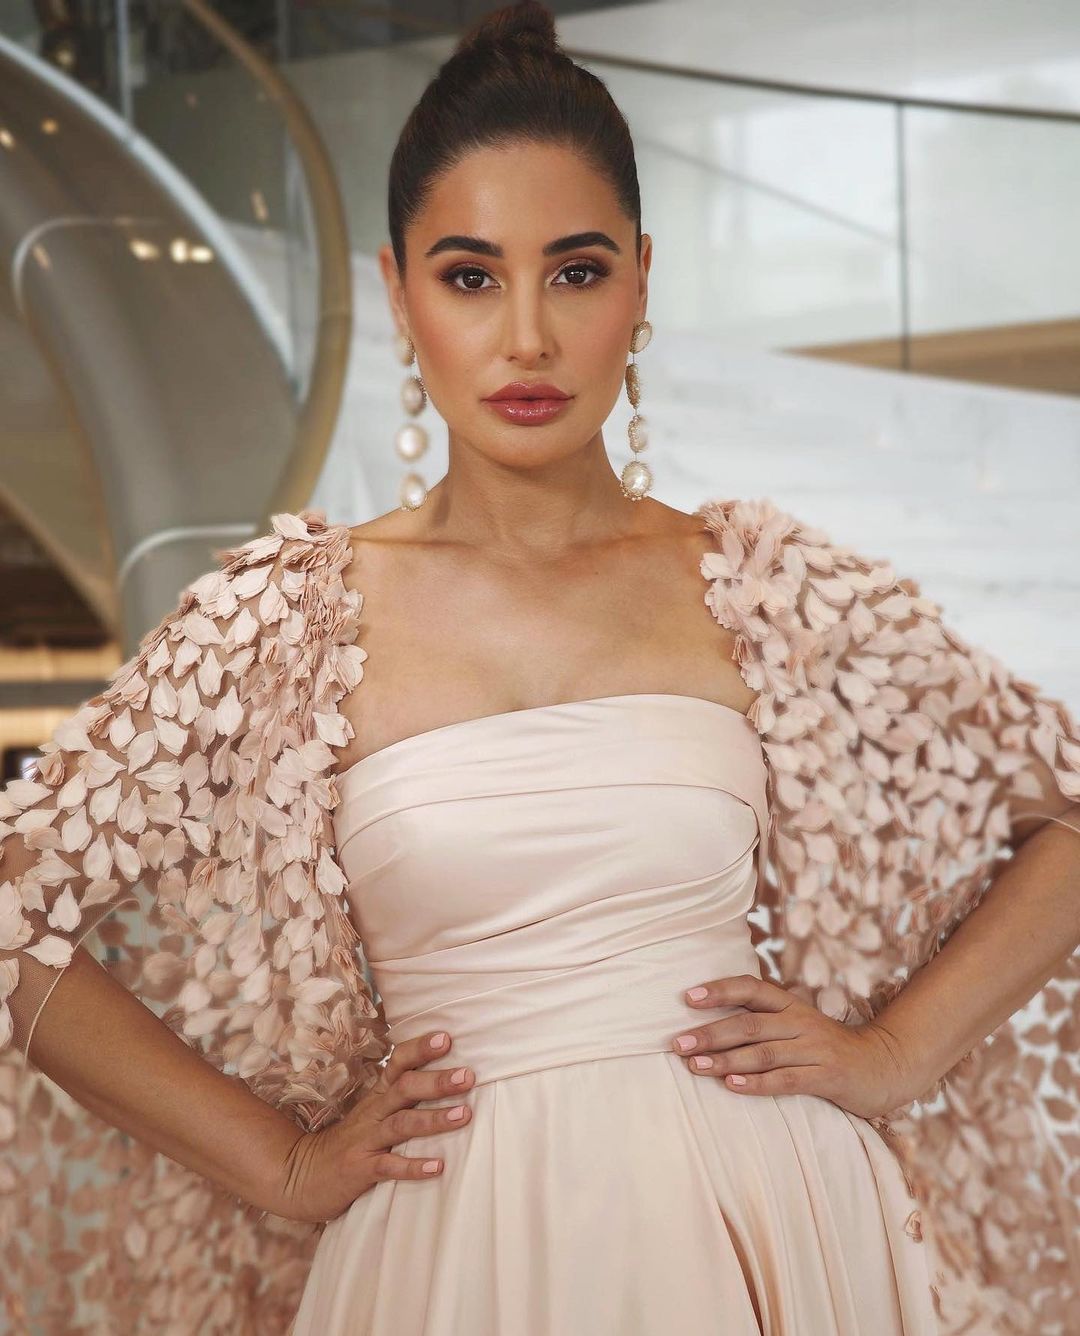 Nargis Fakhri looked majestic with her flawless looks